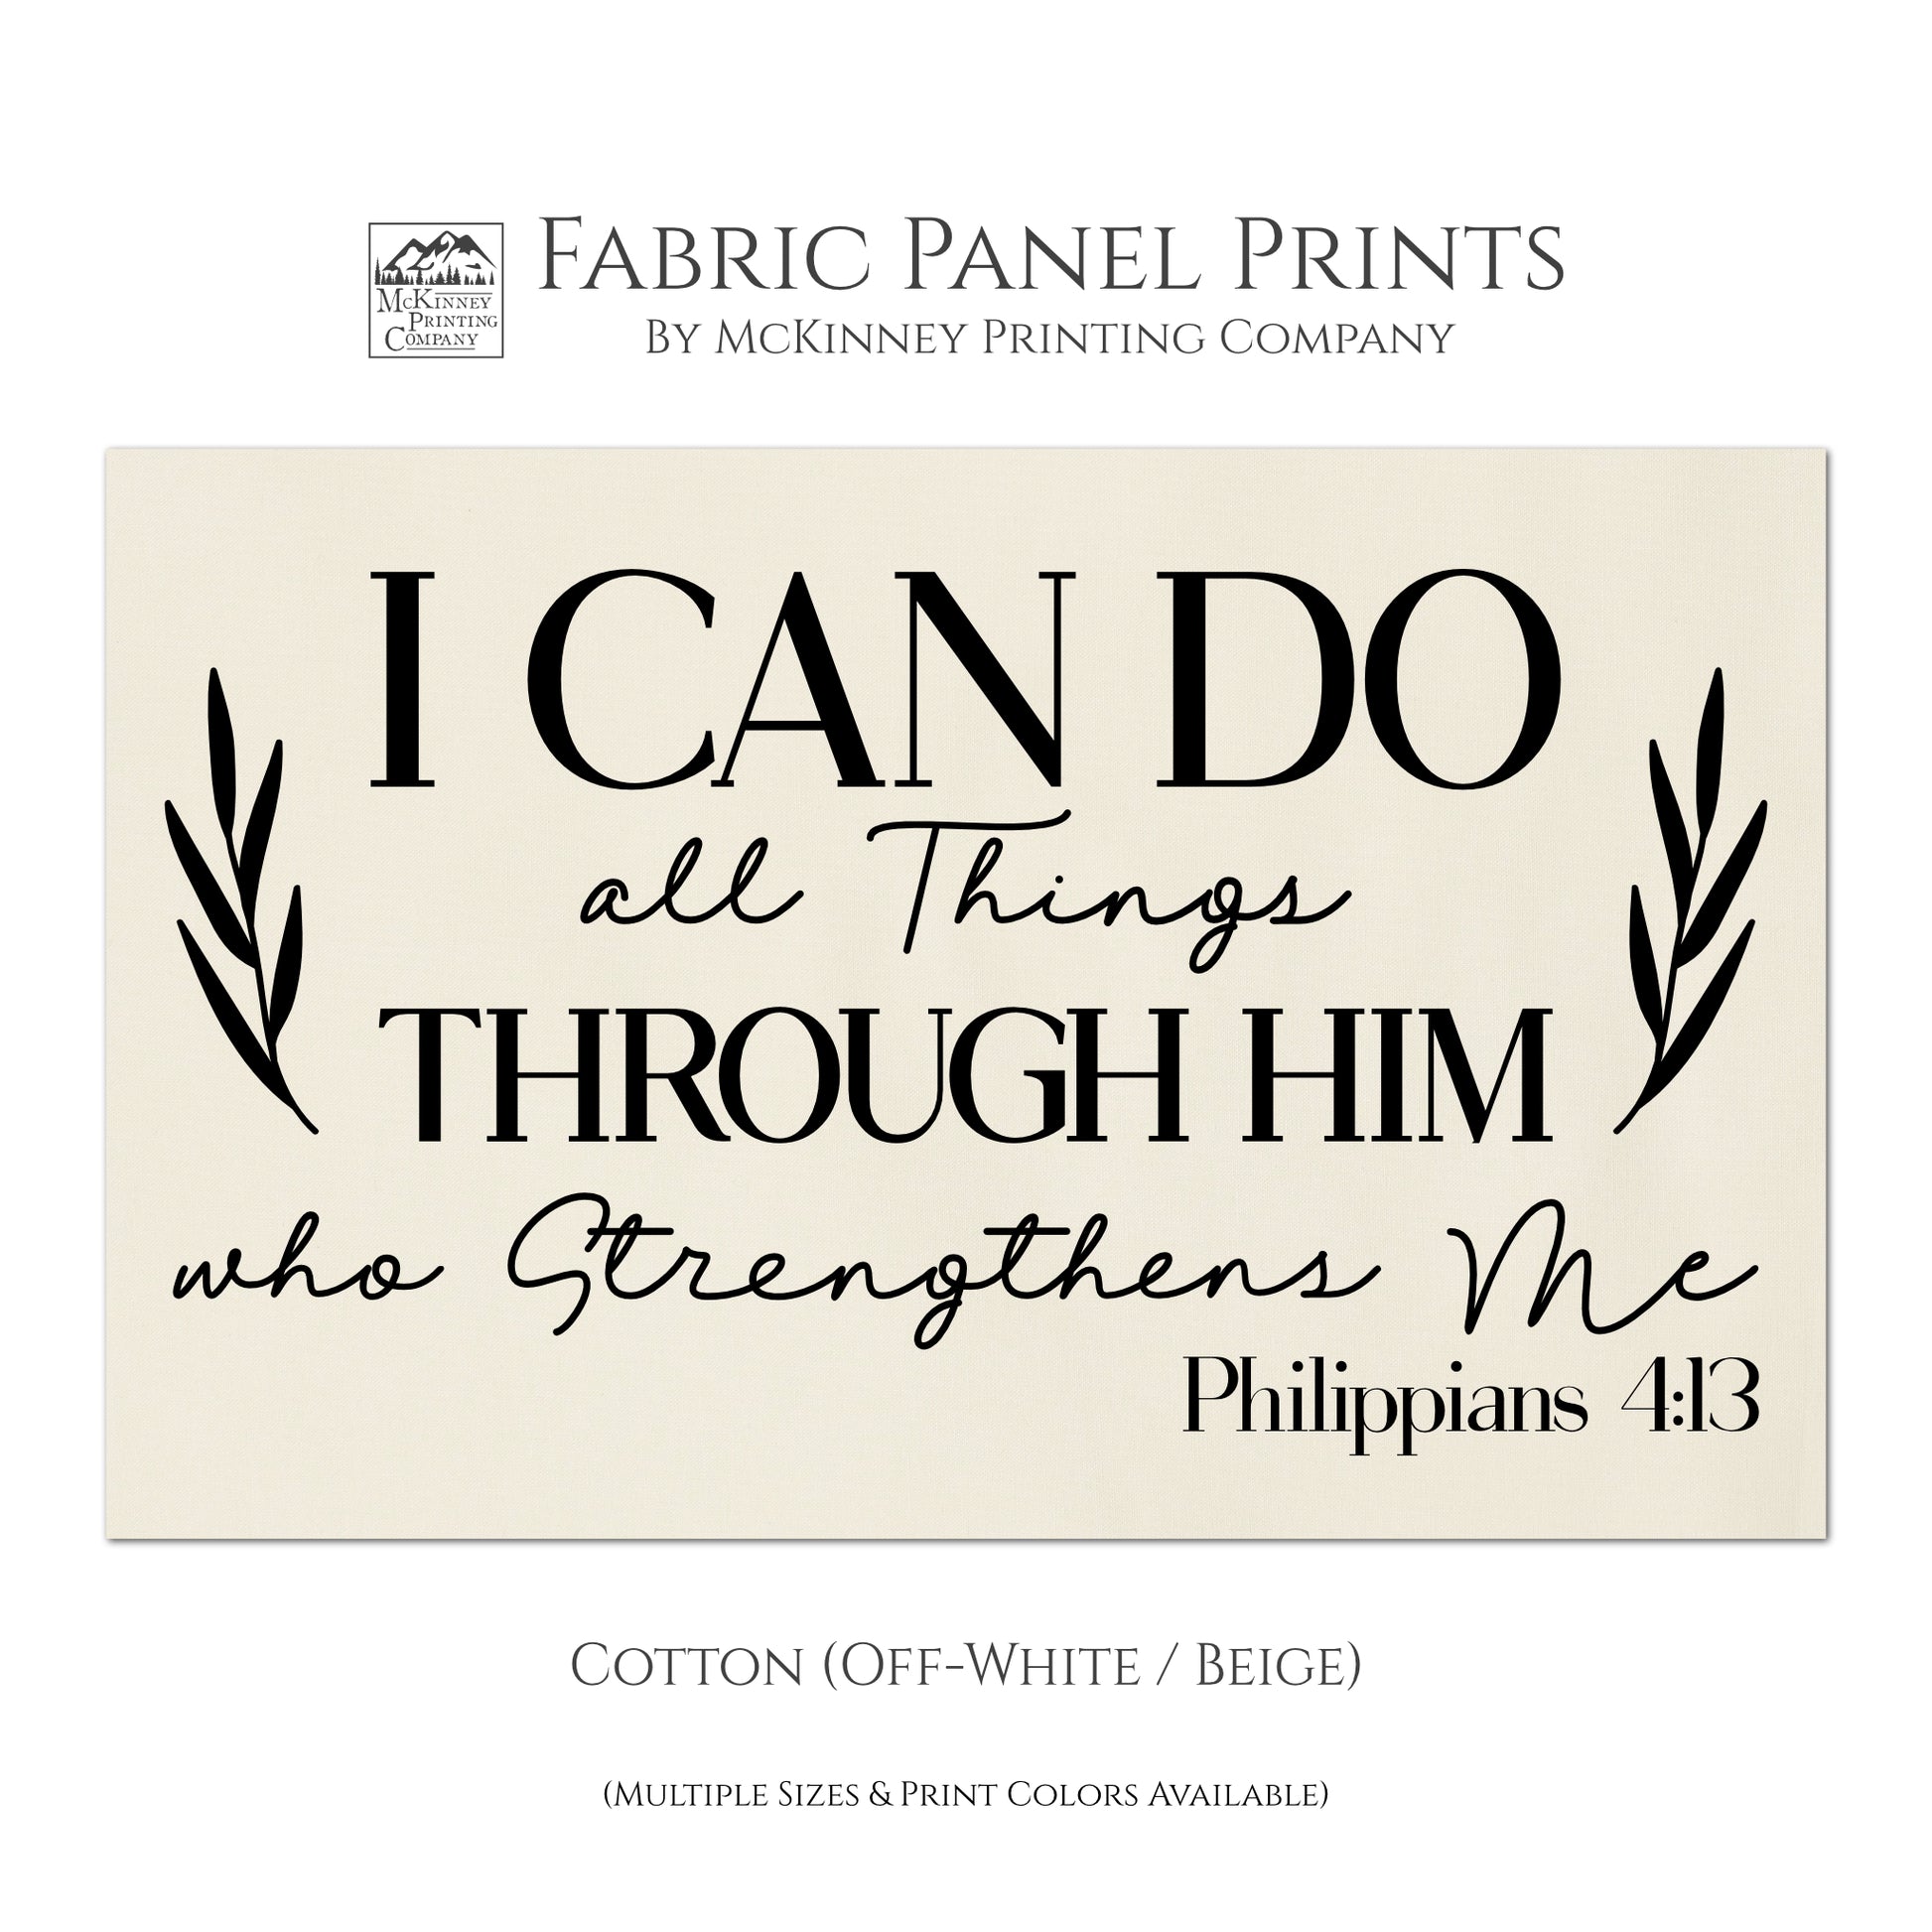 I can do all things through Him who strengthens me. Philippians 4 13 - Fabric Panel Print, Scripture Fabric, Religious Fabric, Quilt Block - Cotton